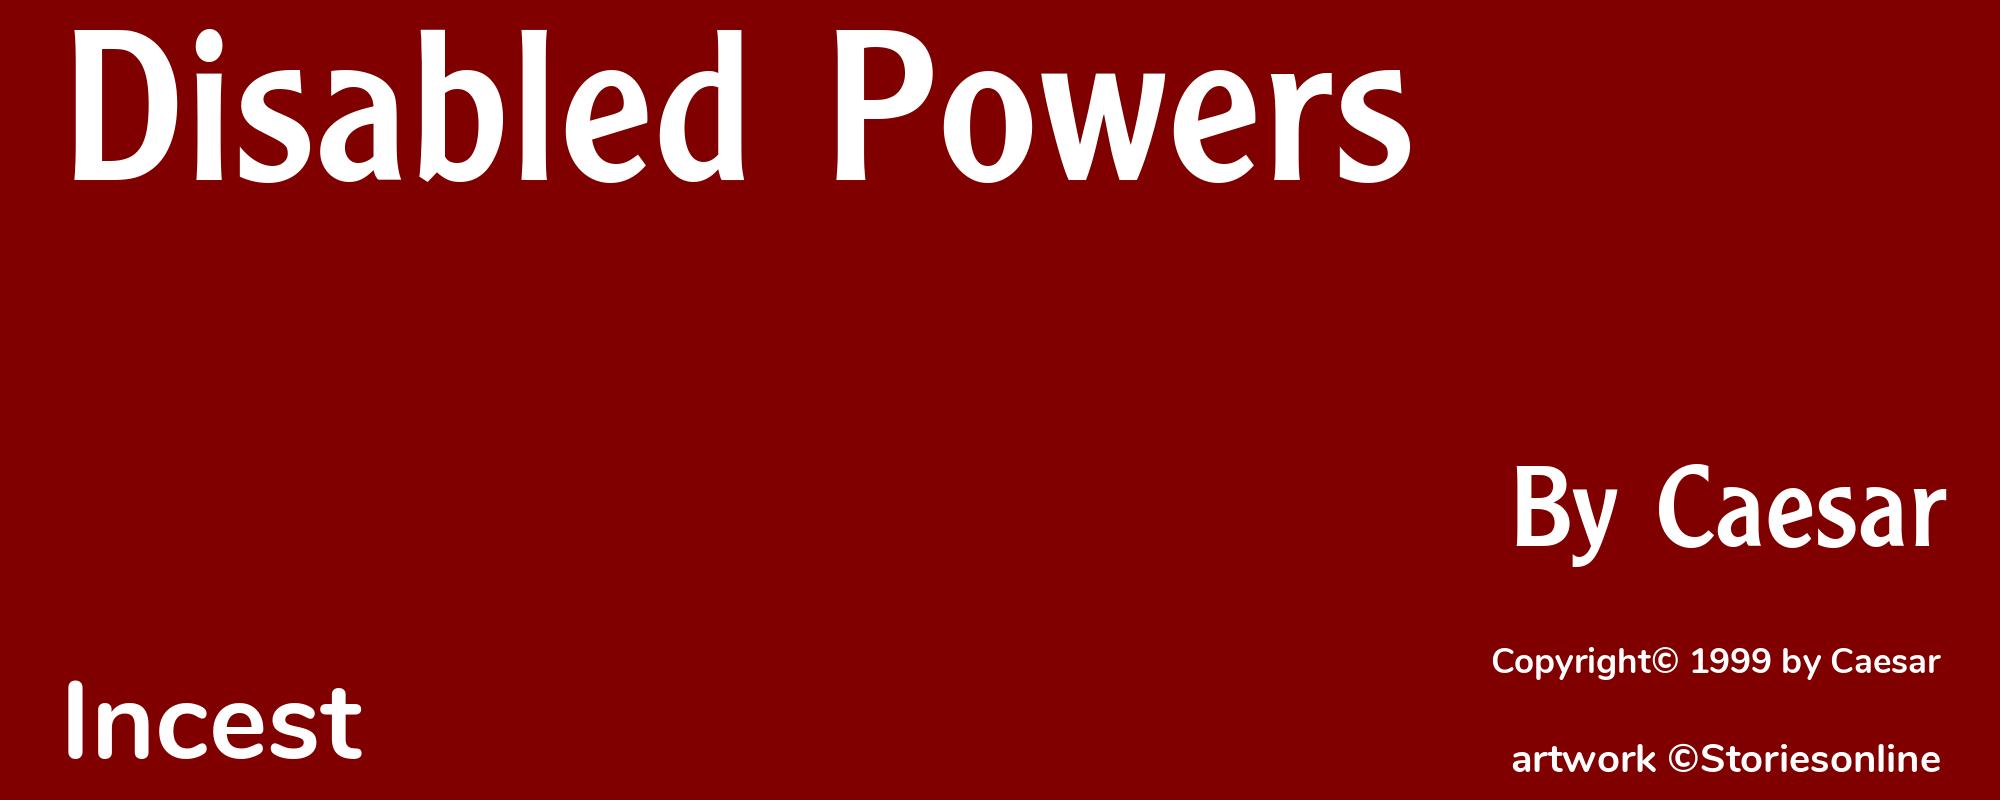 Disabled Powers - Cover